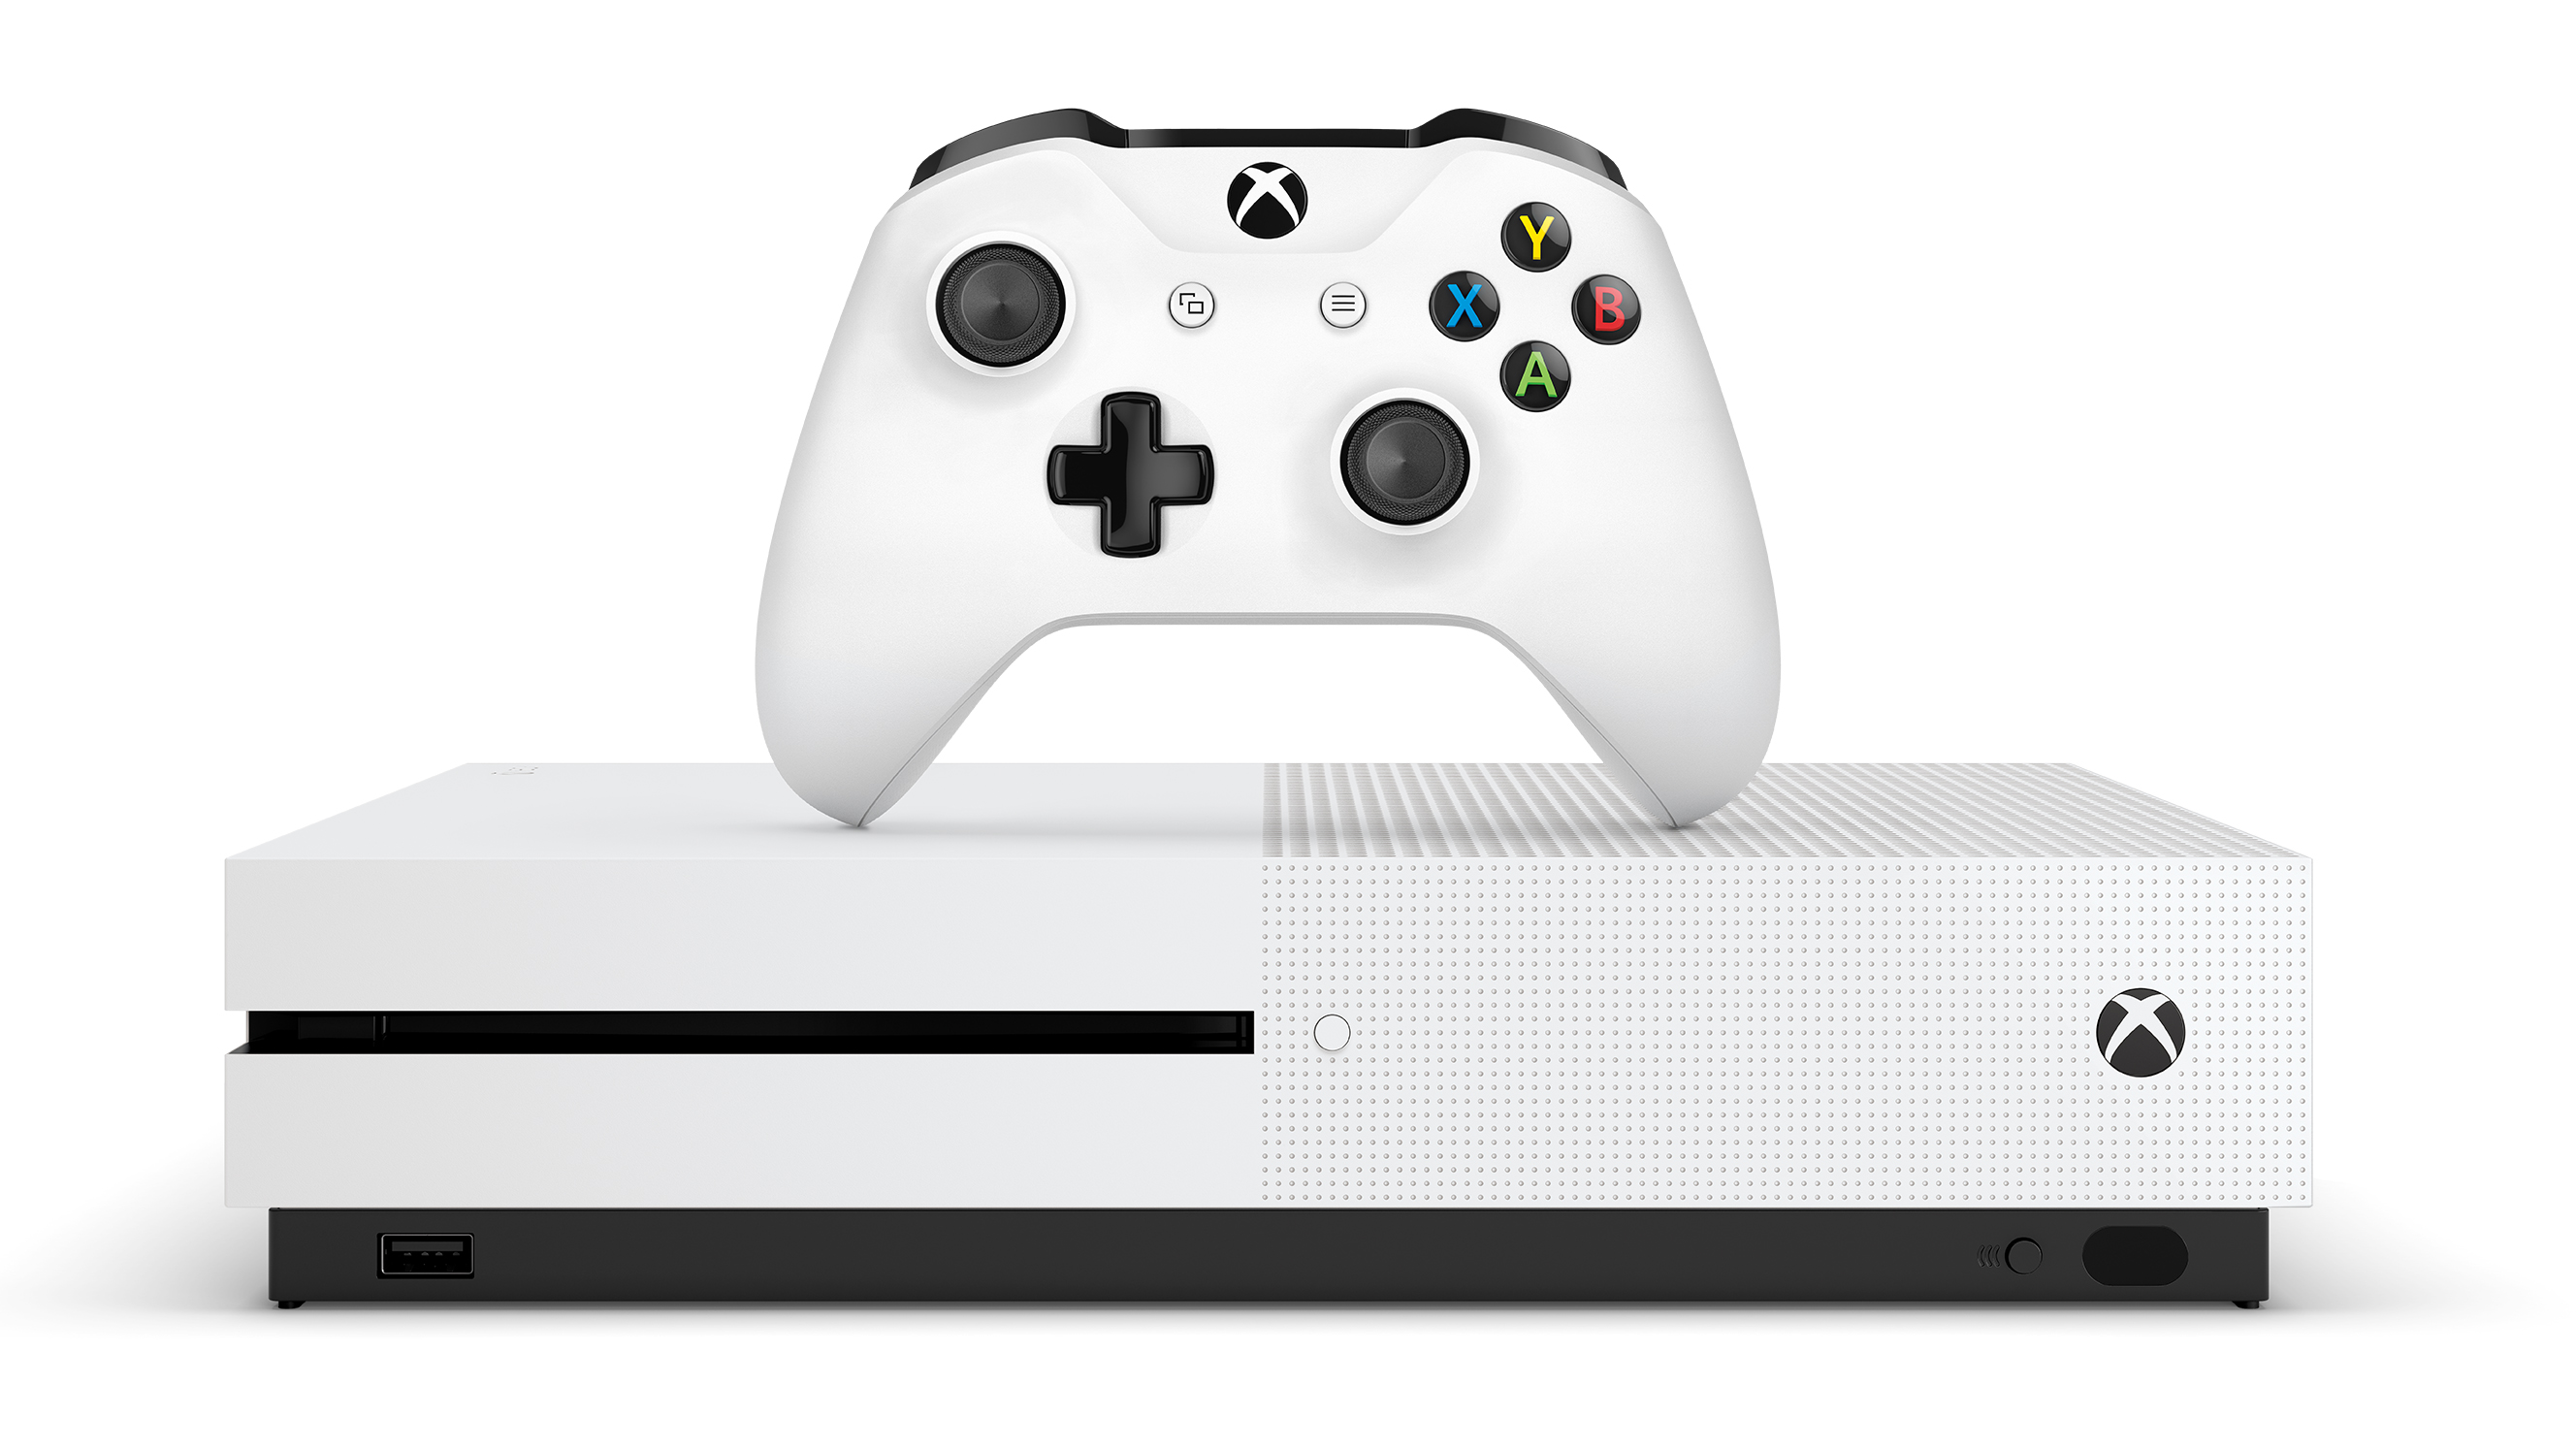 The Xbox One S console